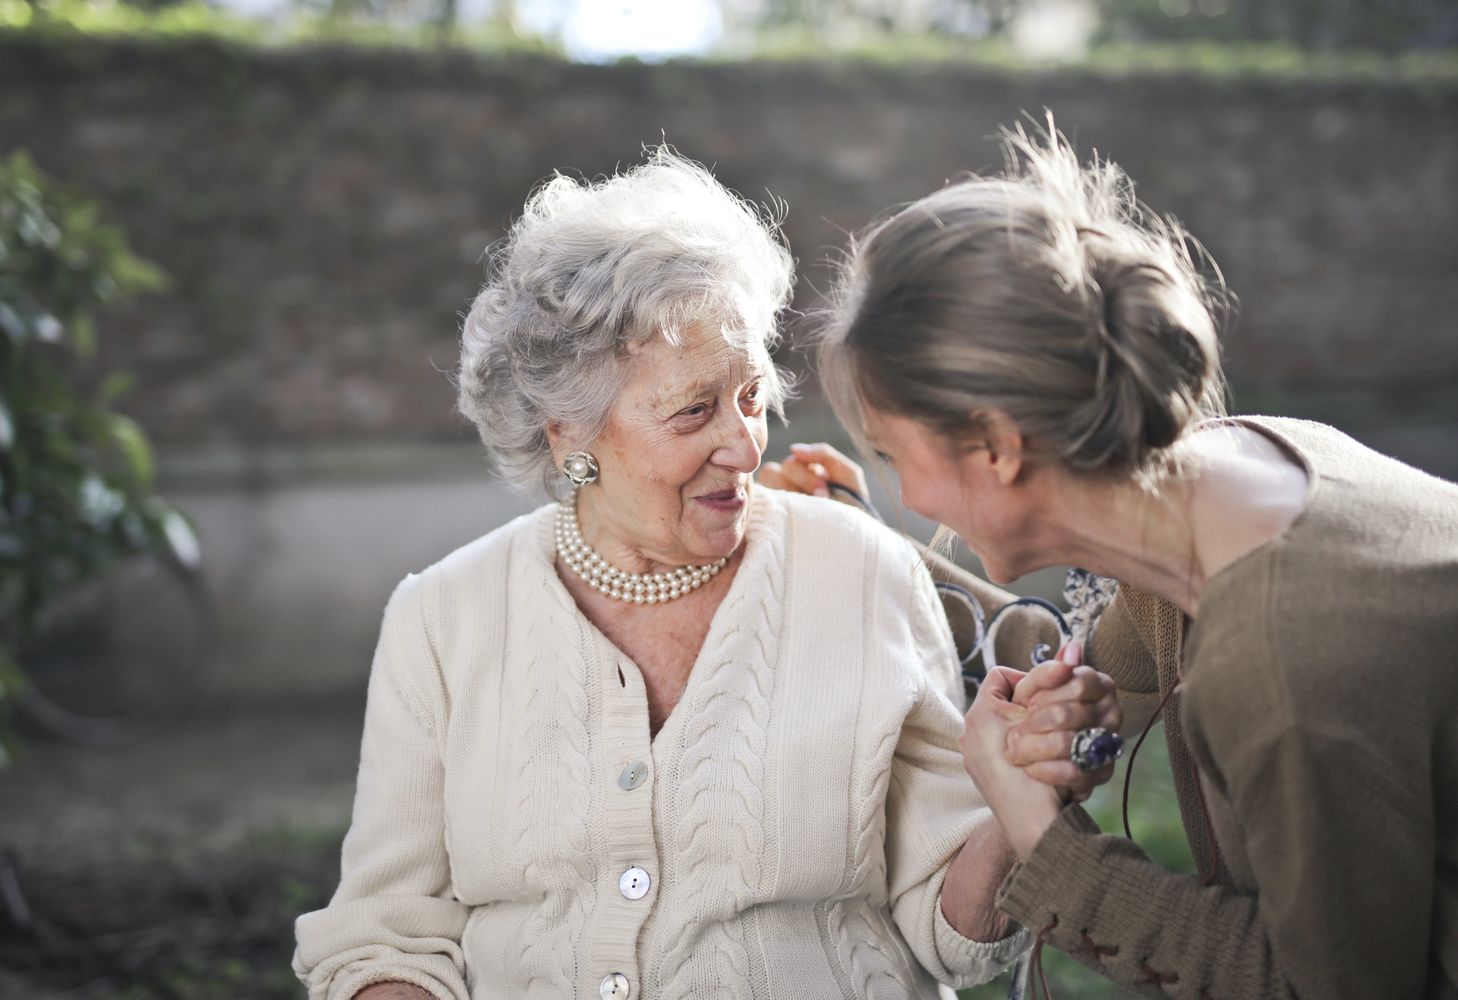 A healthcare professional offering companionship to an elderly woman